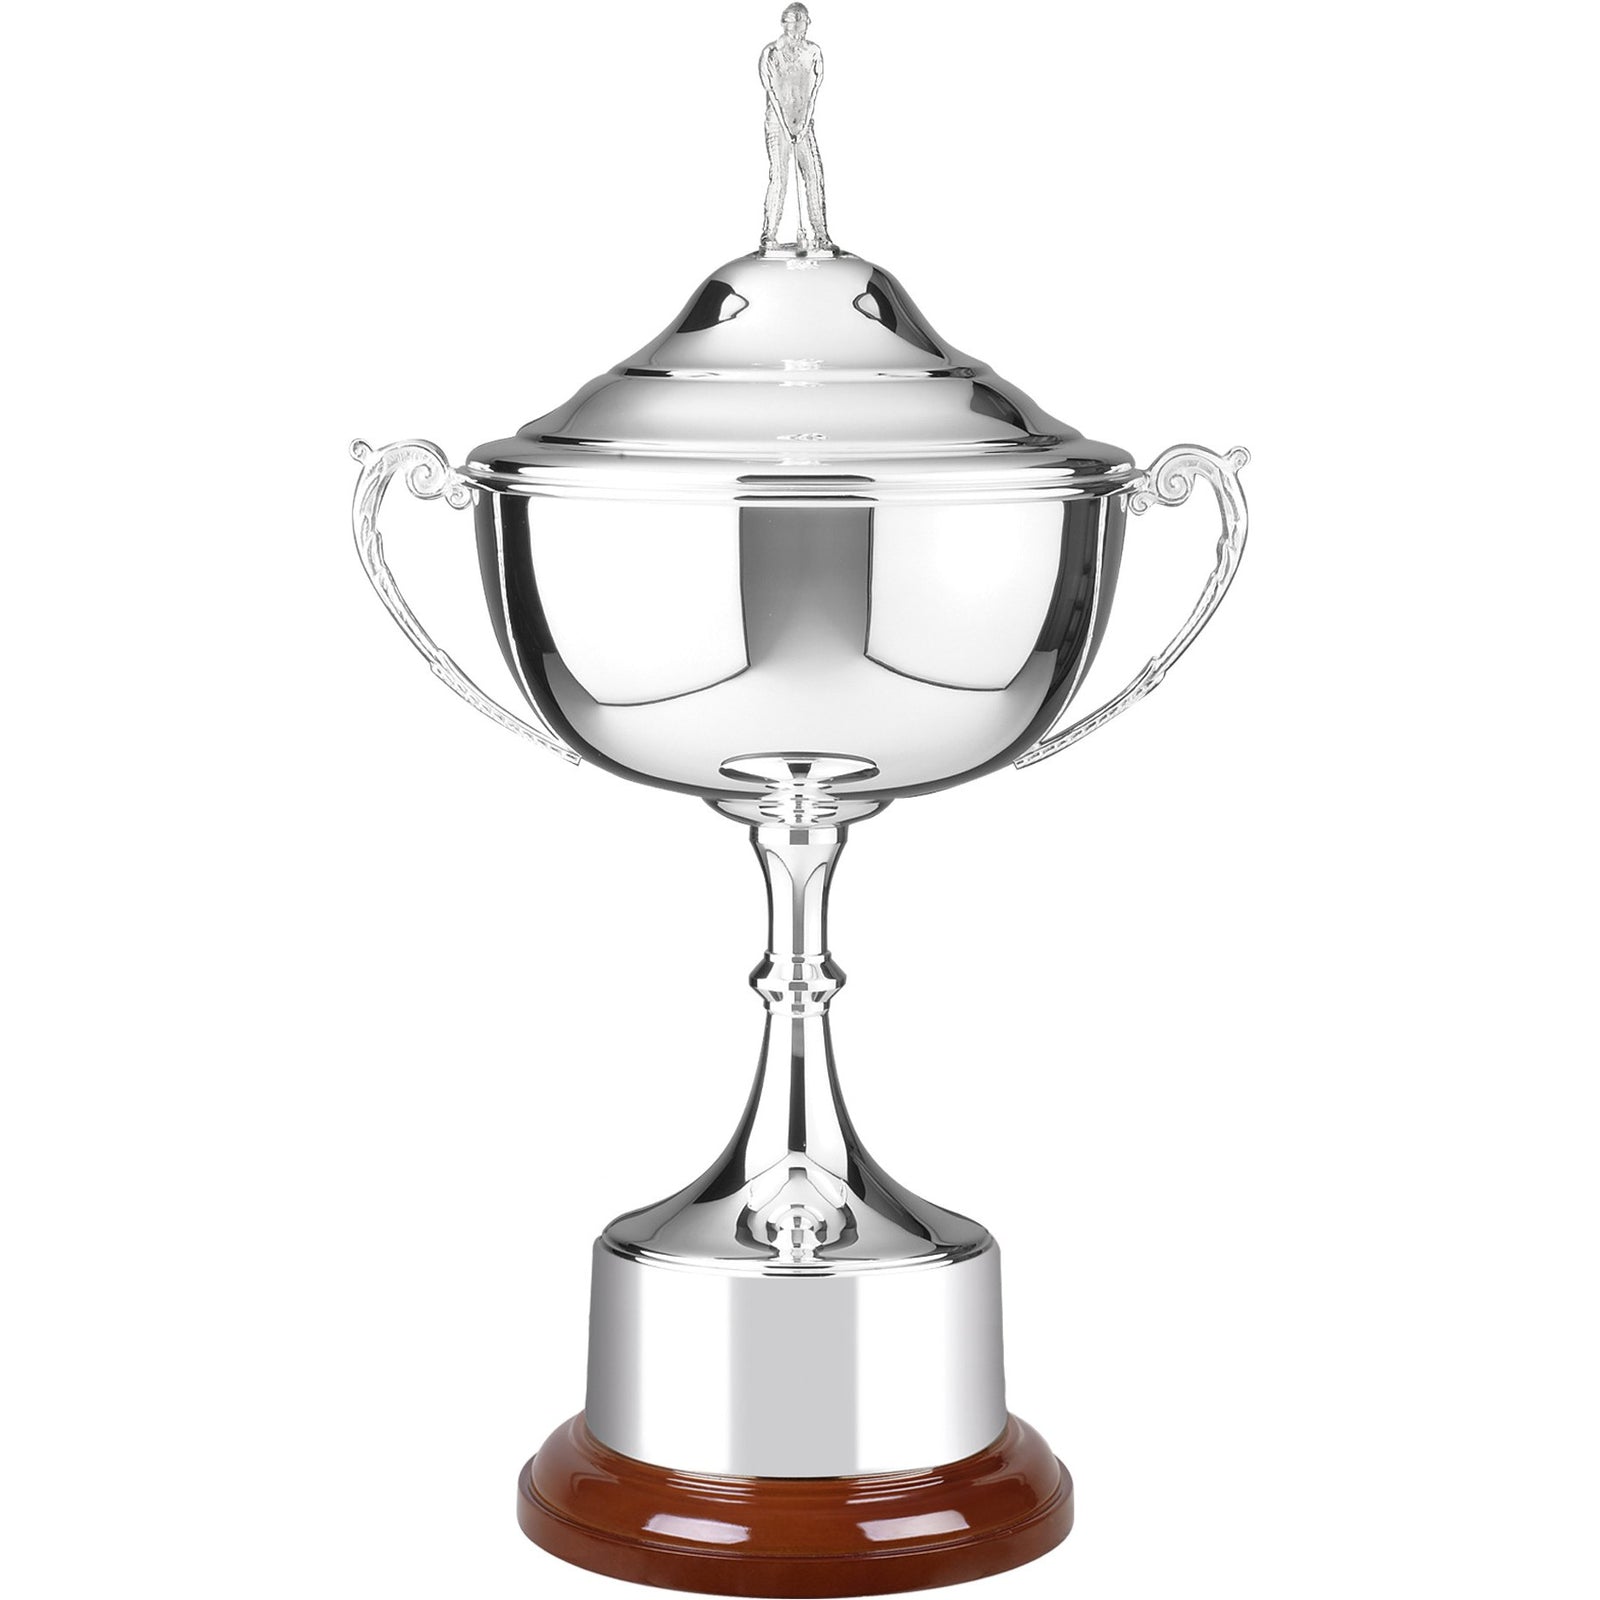 The Canterbury Golf Trophy Cup with Lid